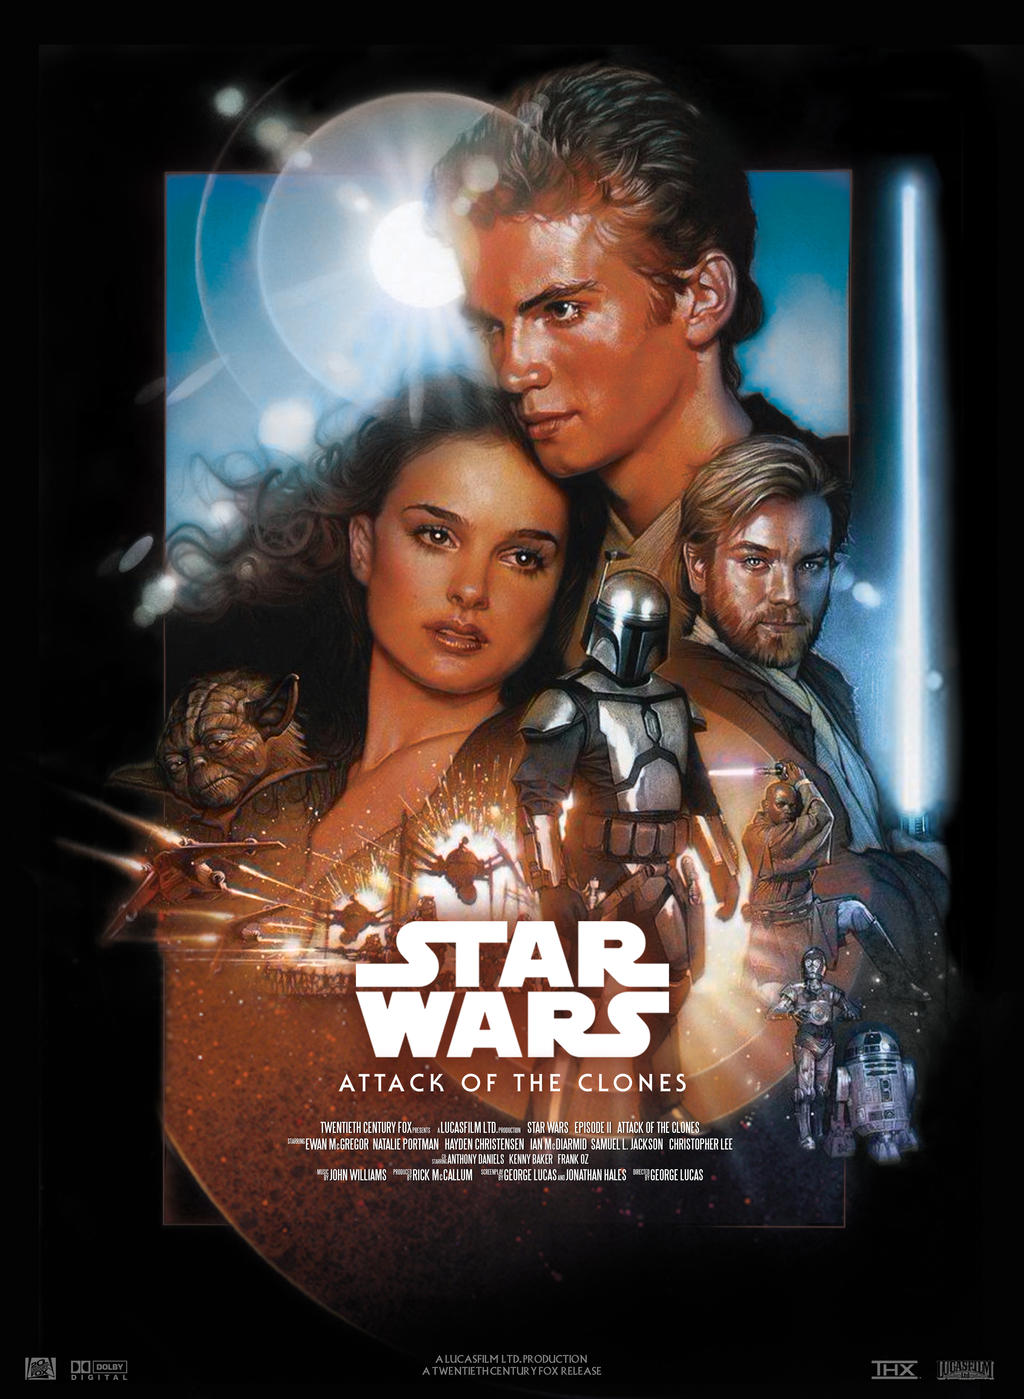 Star Wars II : Attack Of The Clones - Movie Poster by nei1b on DeviantArt